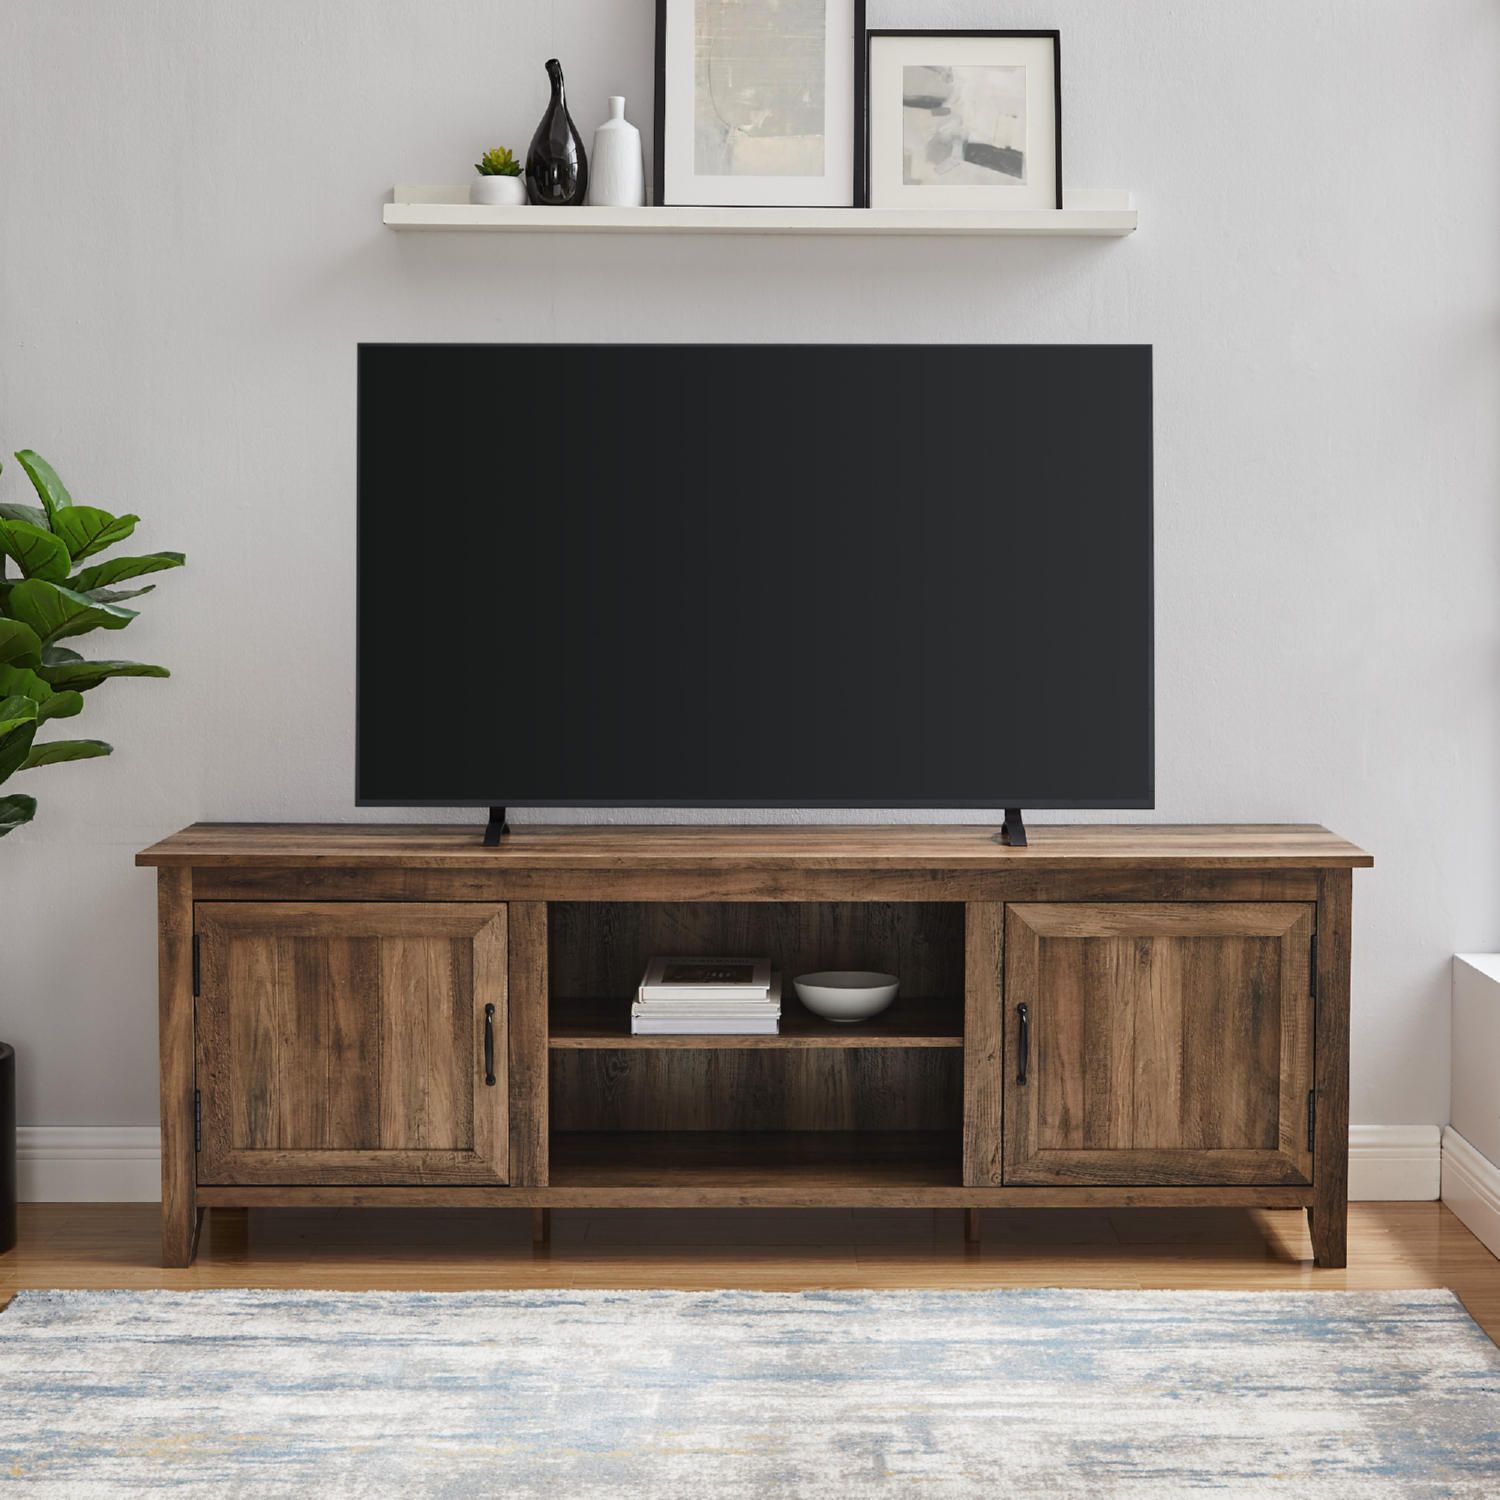 Walker Edison W70cs2dro 70" Modern Farmhouse Tv Stand In Rustic Oak Finish Throughout Modern Farmhouse Rustic Tv Stands (View 15 of 15)